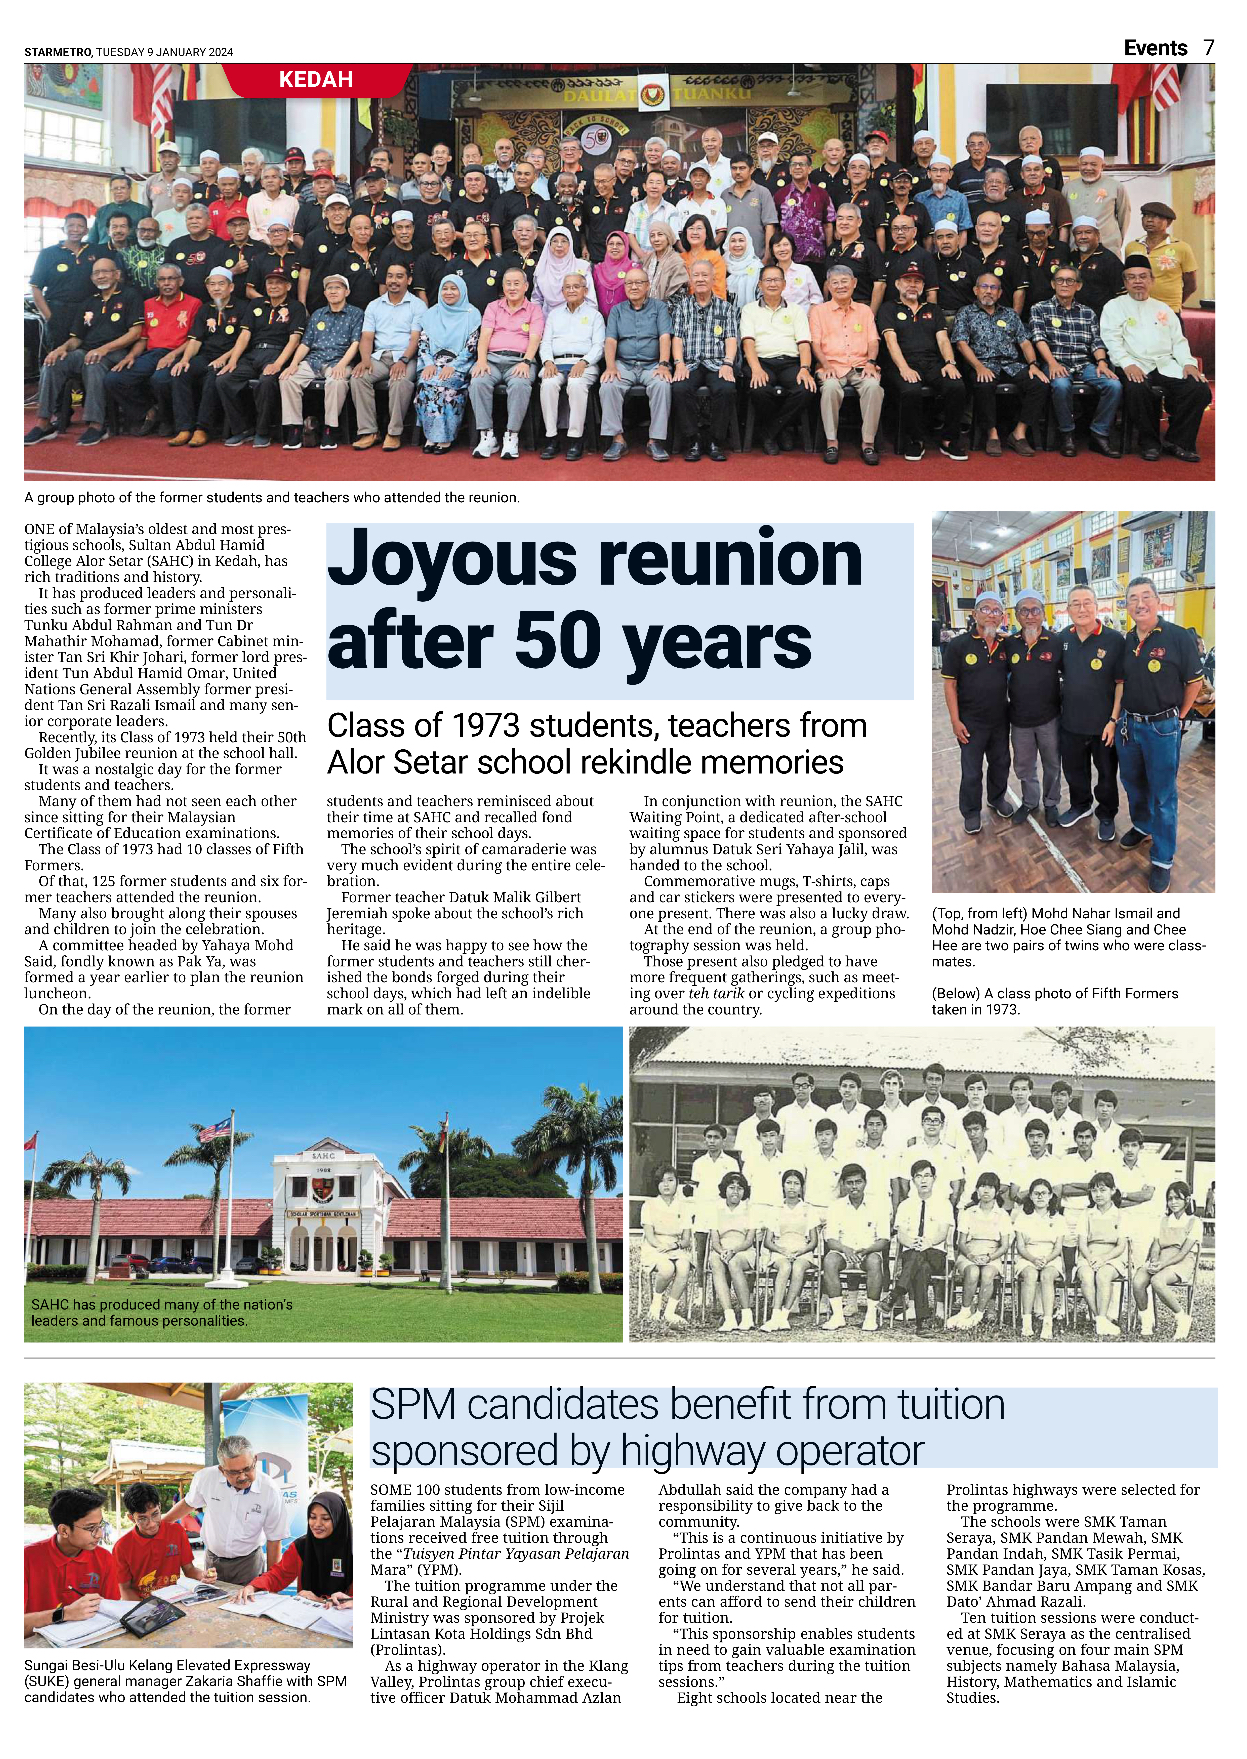 THE STAR – SPM CANDIDATES BENEFIT FROM TUITION SPONSORED BY HIGHWAY OPERATOR